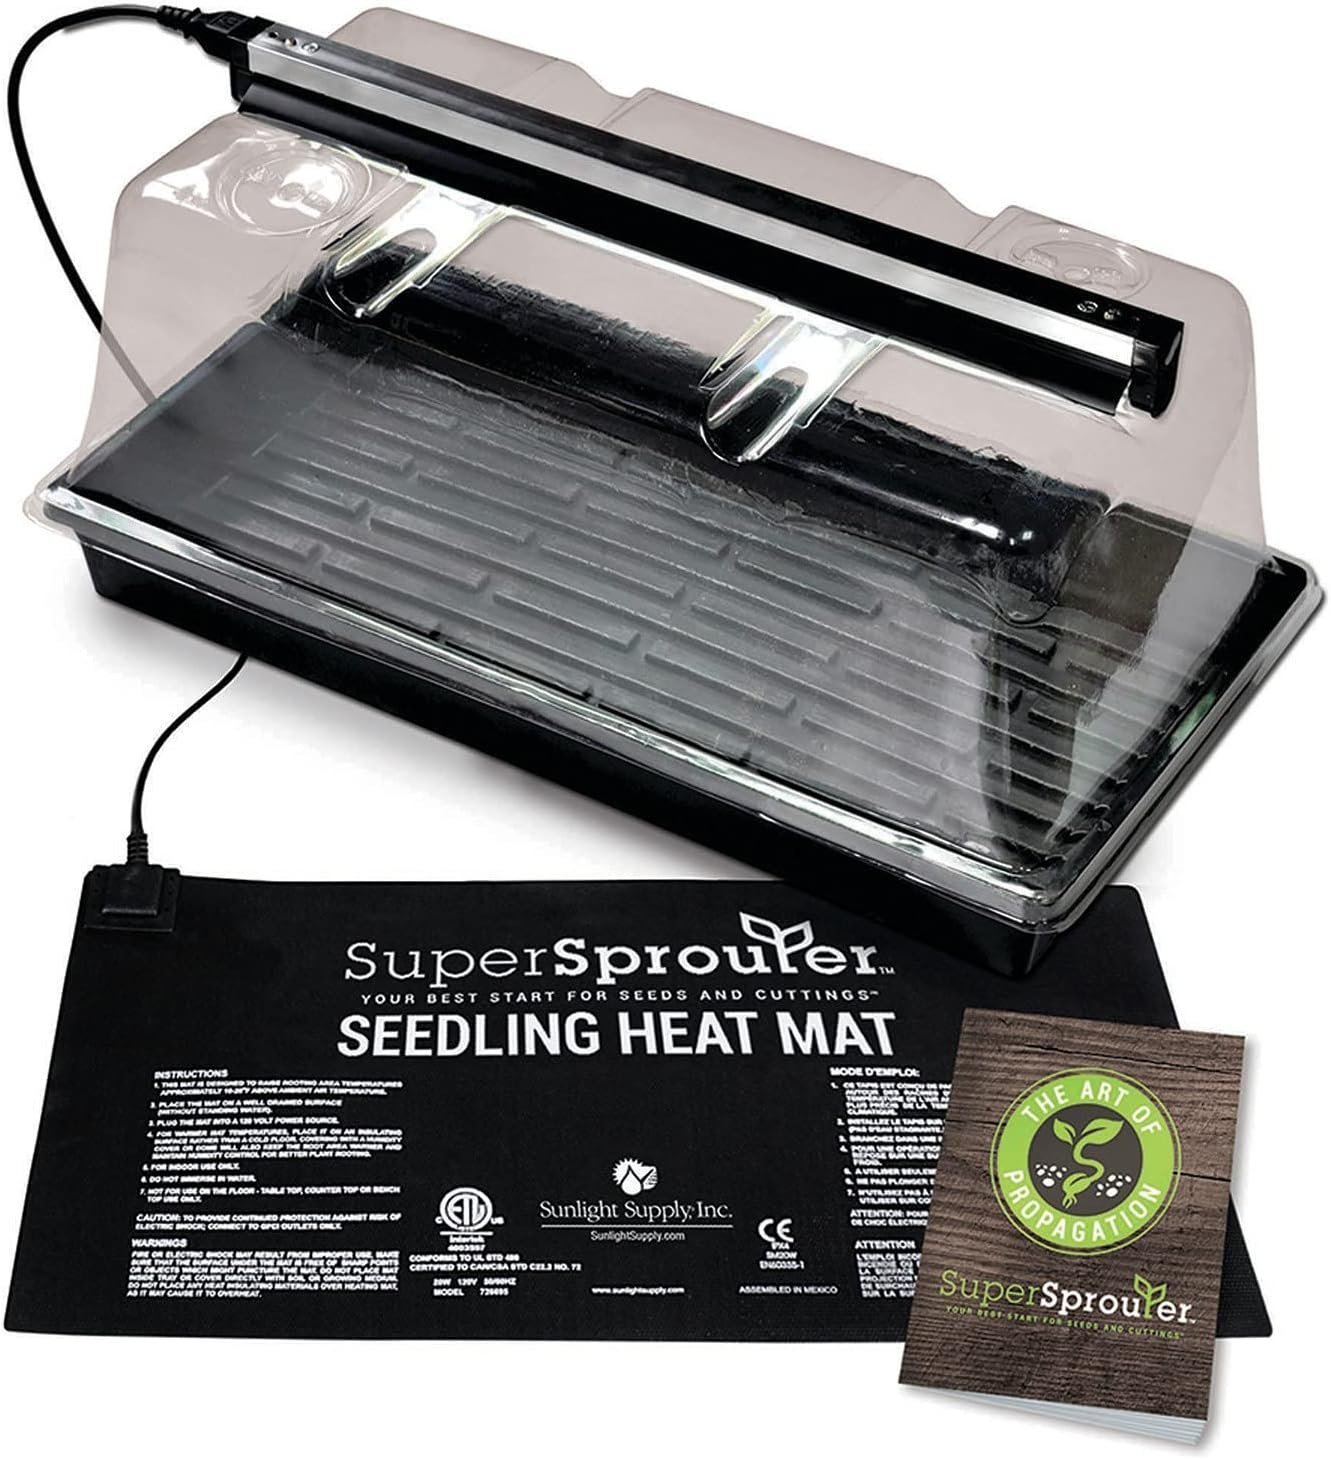 Super Sprouter Deluxe Propagation Kit for Starting Seeds or Cuttings, Includes Humidity Dome, Tray, Grow Light, and Booklet